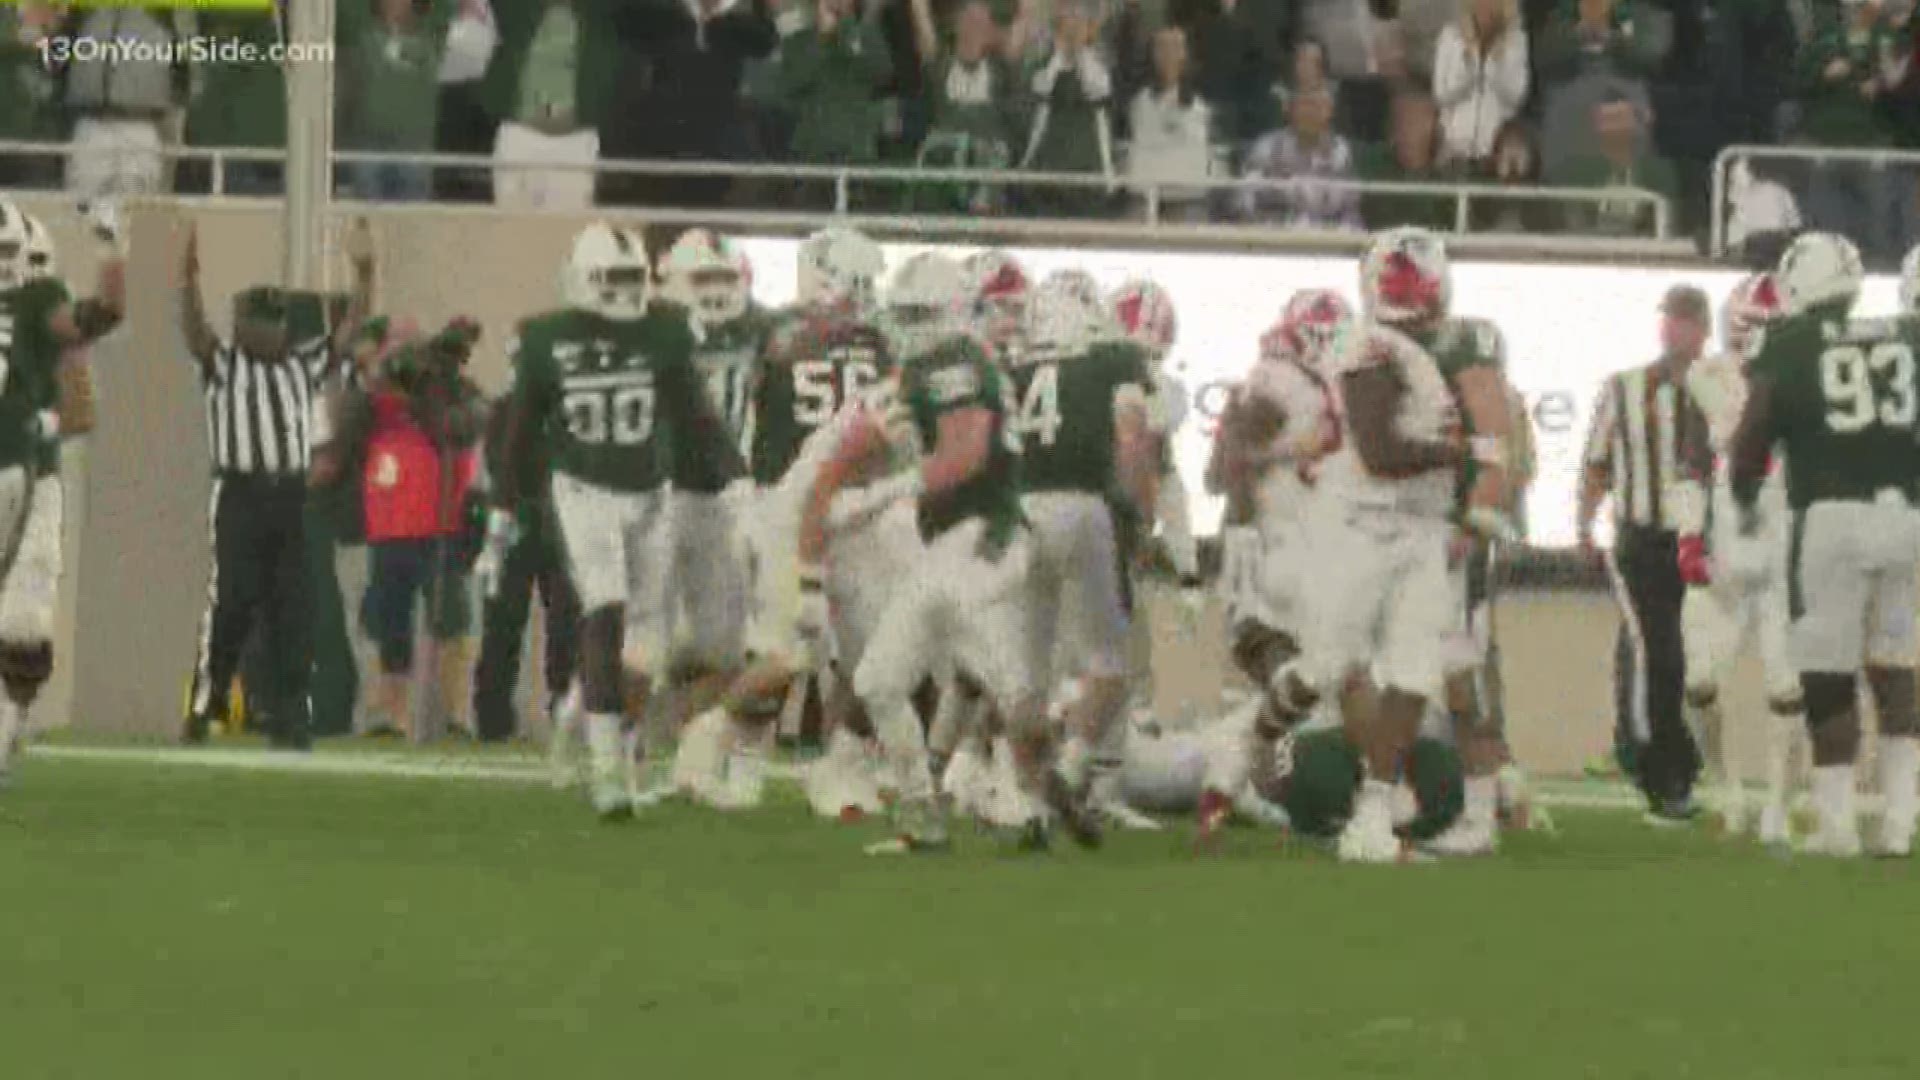 Michigan State remains ranked at No. 25 in the AP Poll despite beating Indiana on Saturday.